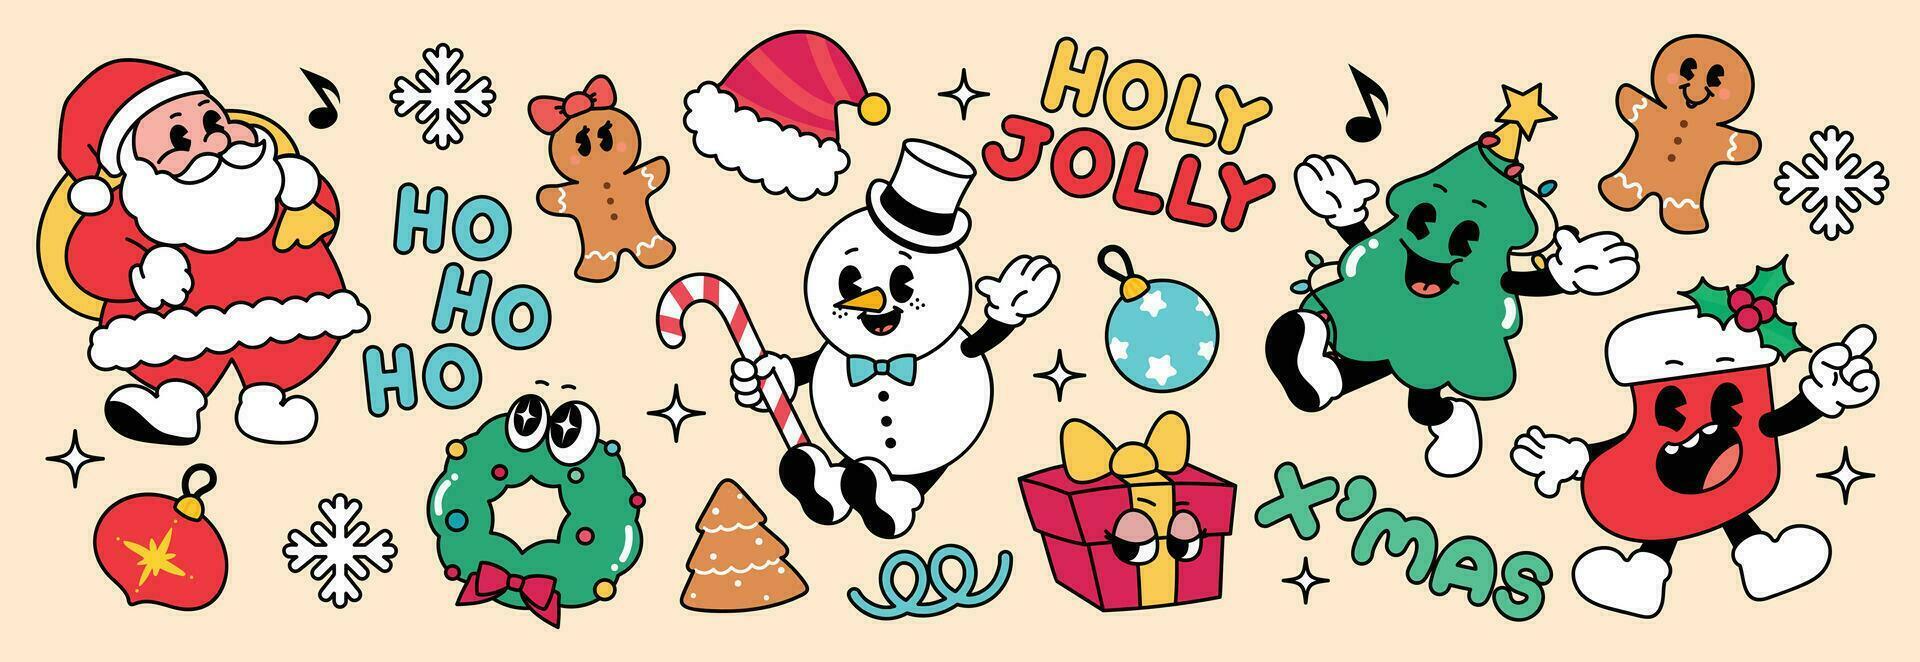 Merry Christmas 70s groovy element vector. Collection of cartoon characters, doodle smile face, santa, snowman, wreath, christmas tree, gift. Cute retro groovy hippie design for decorative, sticker. vector